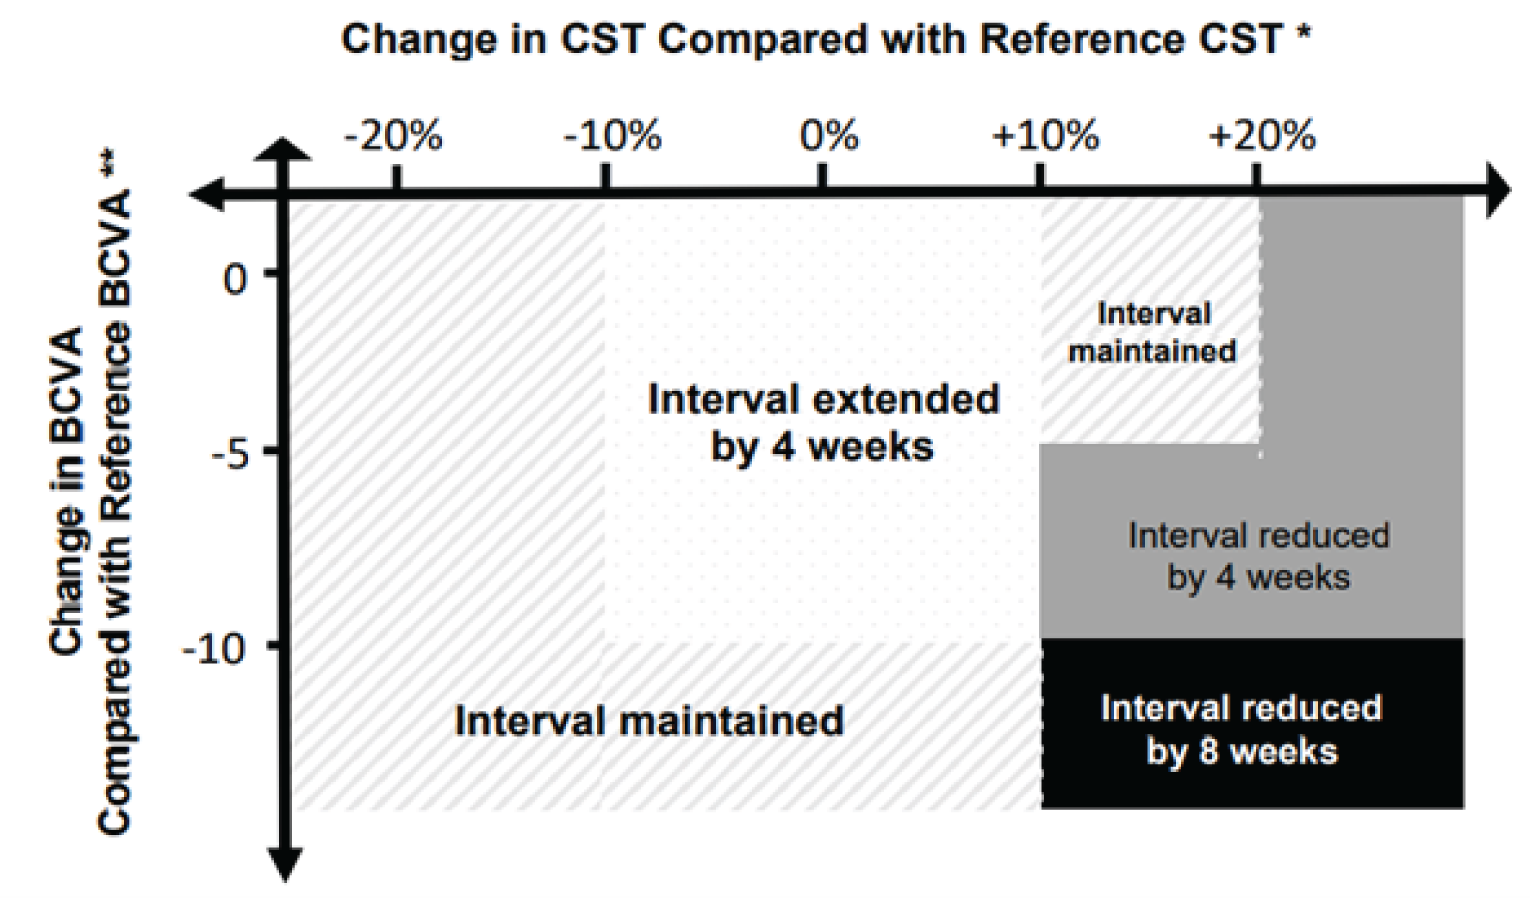 If the CST value increased or decreased by ≤ 10% without an associated BCVA decrease of ≥ 10 letters, the dosing interval was extended by 4 weeks. If the CST value decreased by > 10%, increased or decreased by ≤ 10% with an associated BCVA decrease of ≥ 10 letters, or increased by > 10% to ≤ 20% without an associated BCVA decrease of ≥ 5 letters, the interval was maintained. If the CST value increased by > 10% to ≤ 20% with an associated BCVA decrease of ≥ 5 to < 10 letters, or increased by > 20% without an associated BCVA decrease of ≥ 10 letters, the interval was reduced by 4 weeks. If the CST value increased by > 10% with an associated BCVA decrease of ≥ 10 letters, the interval was reduced by 8 weeks.